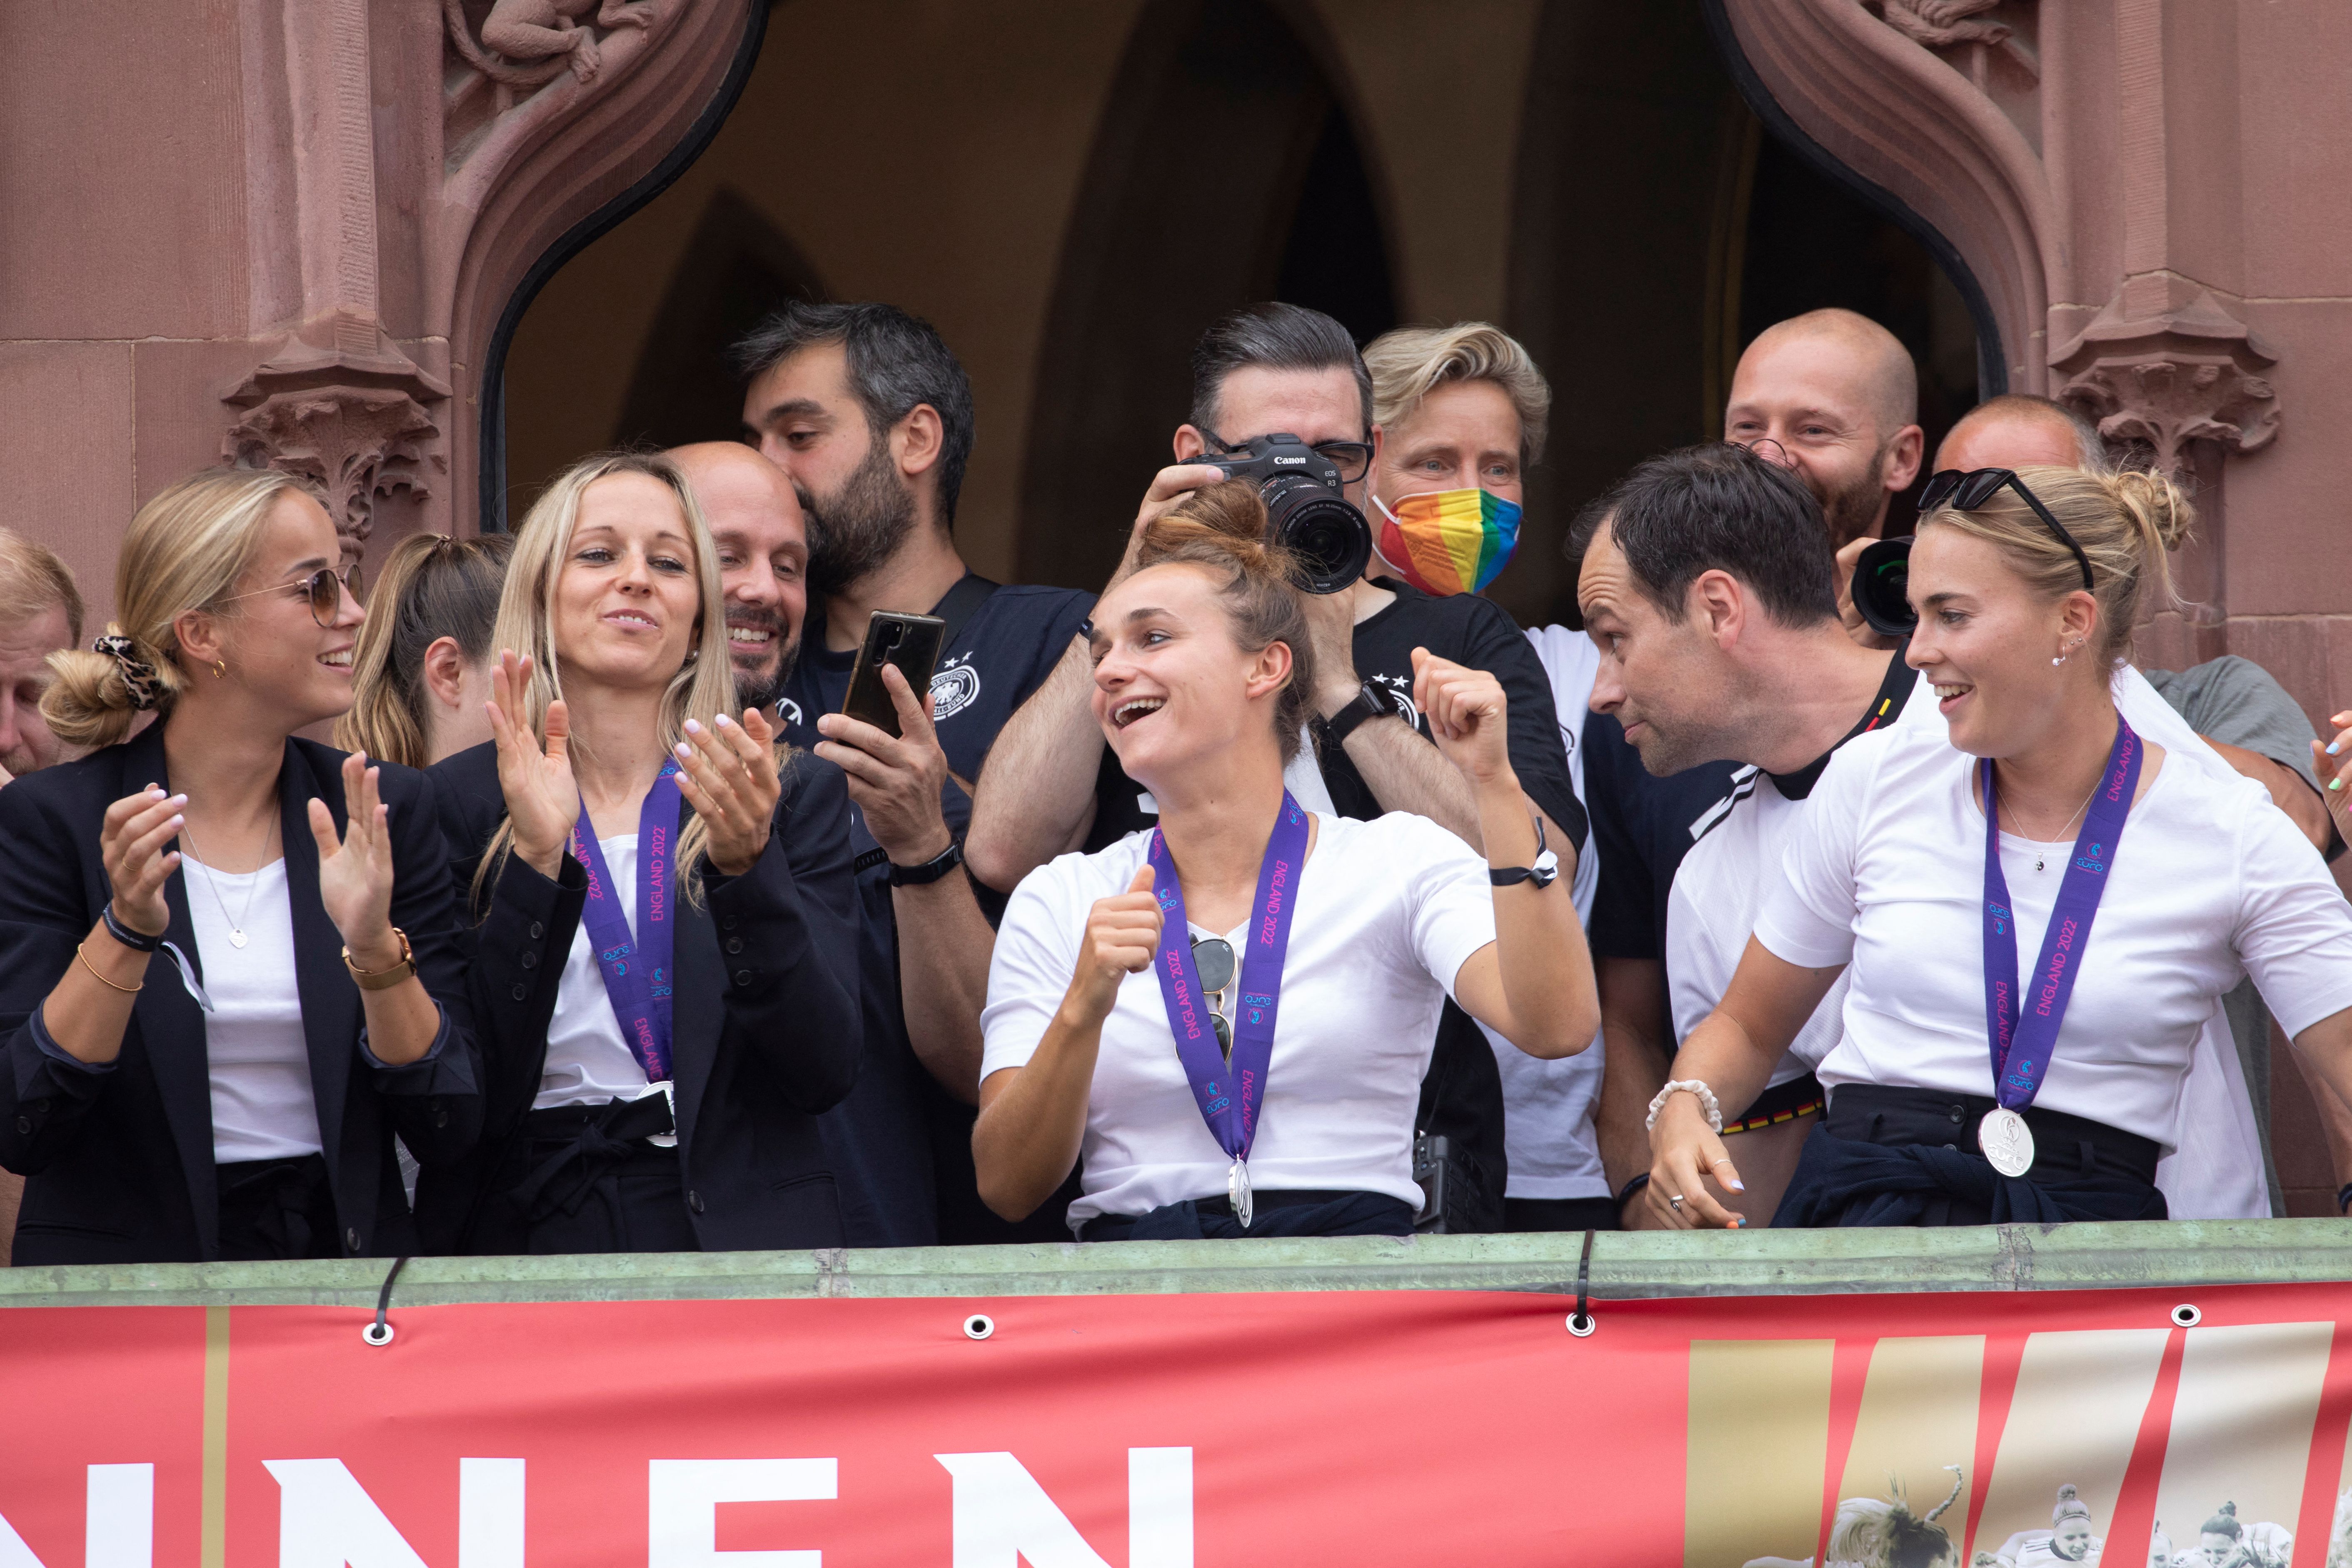 Germany women's team players on the balcony applauding as supporters receive them at Roemer square in Frankfurt